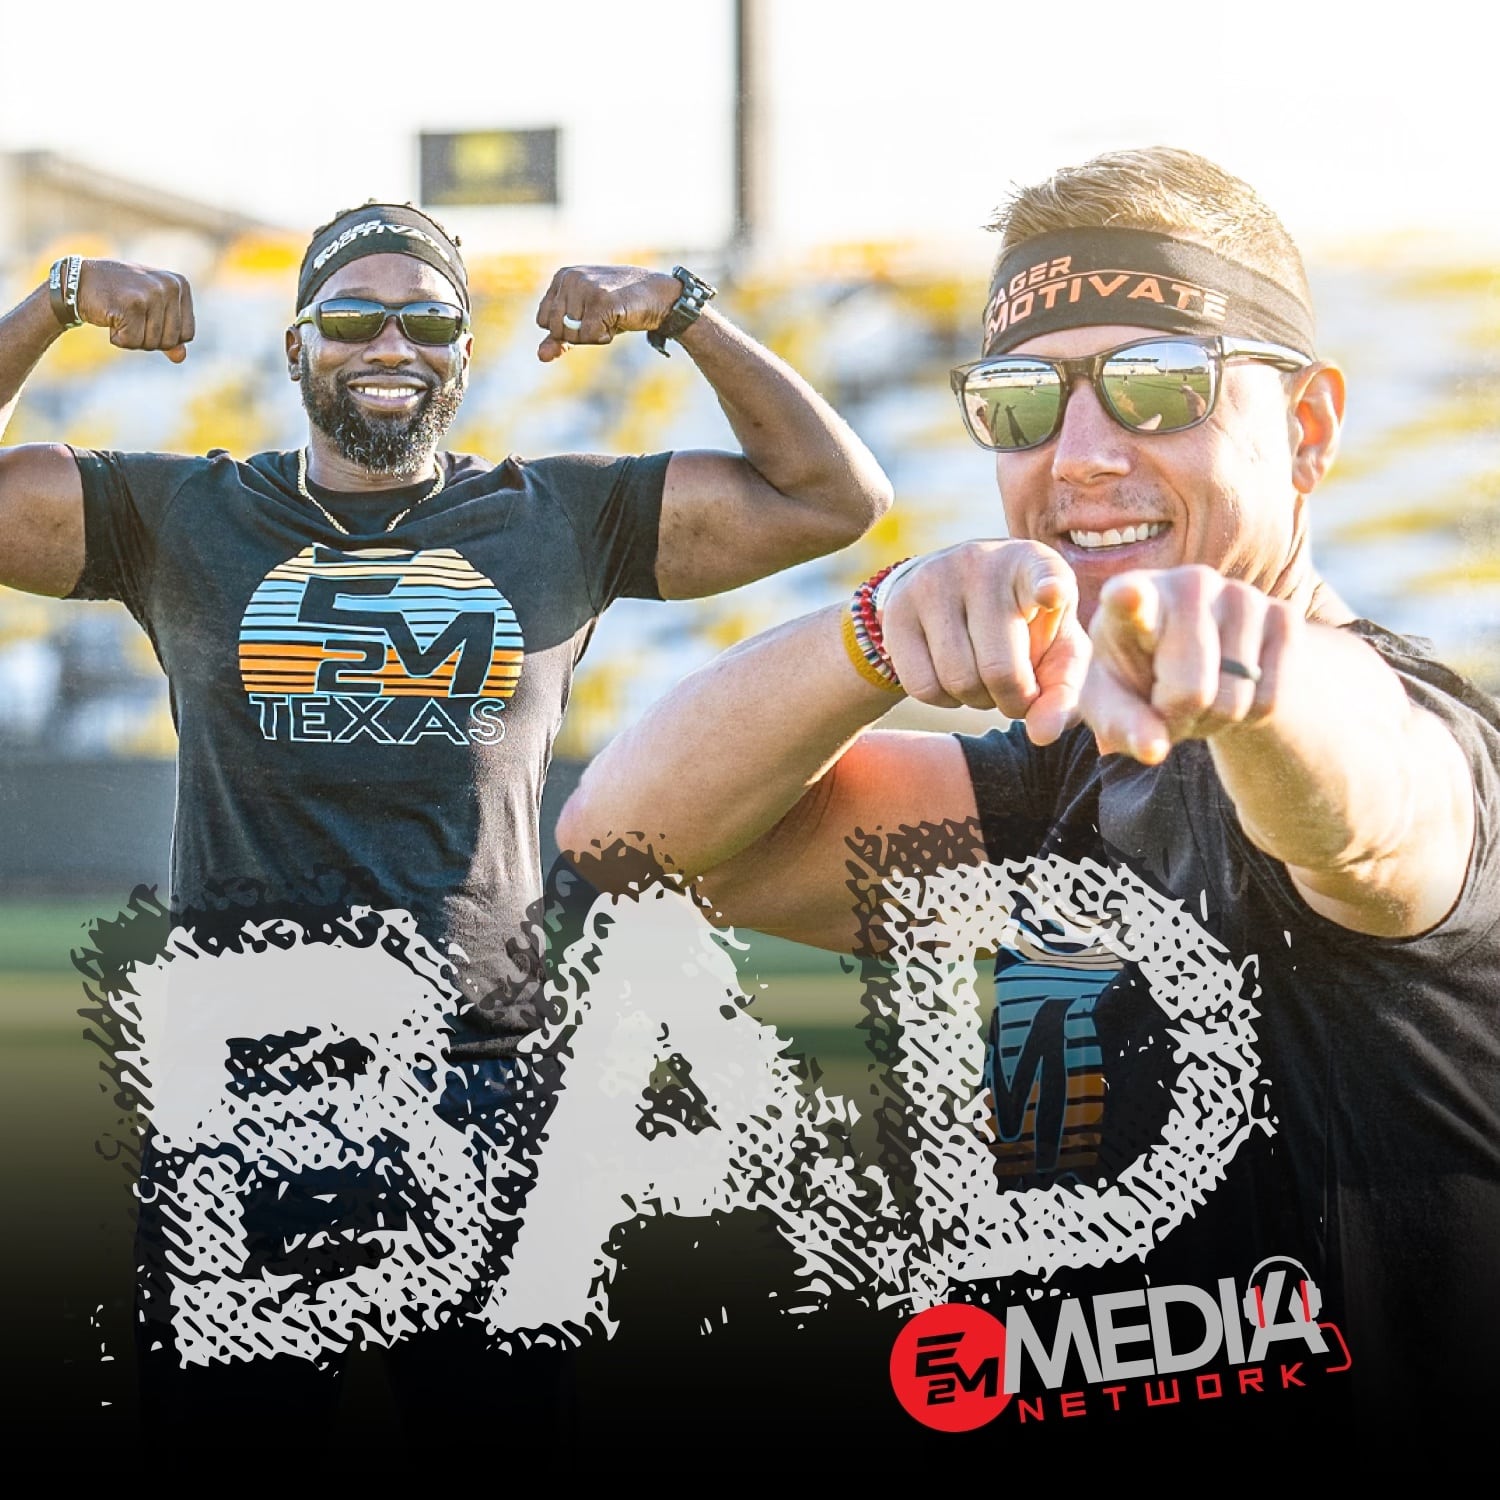 E2M Fitness Media Network – BAD Podcast – Don’t Be an Imposter “Quiet your inner negativity.”